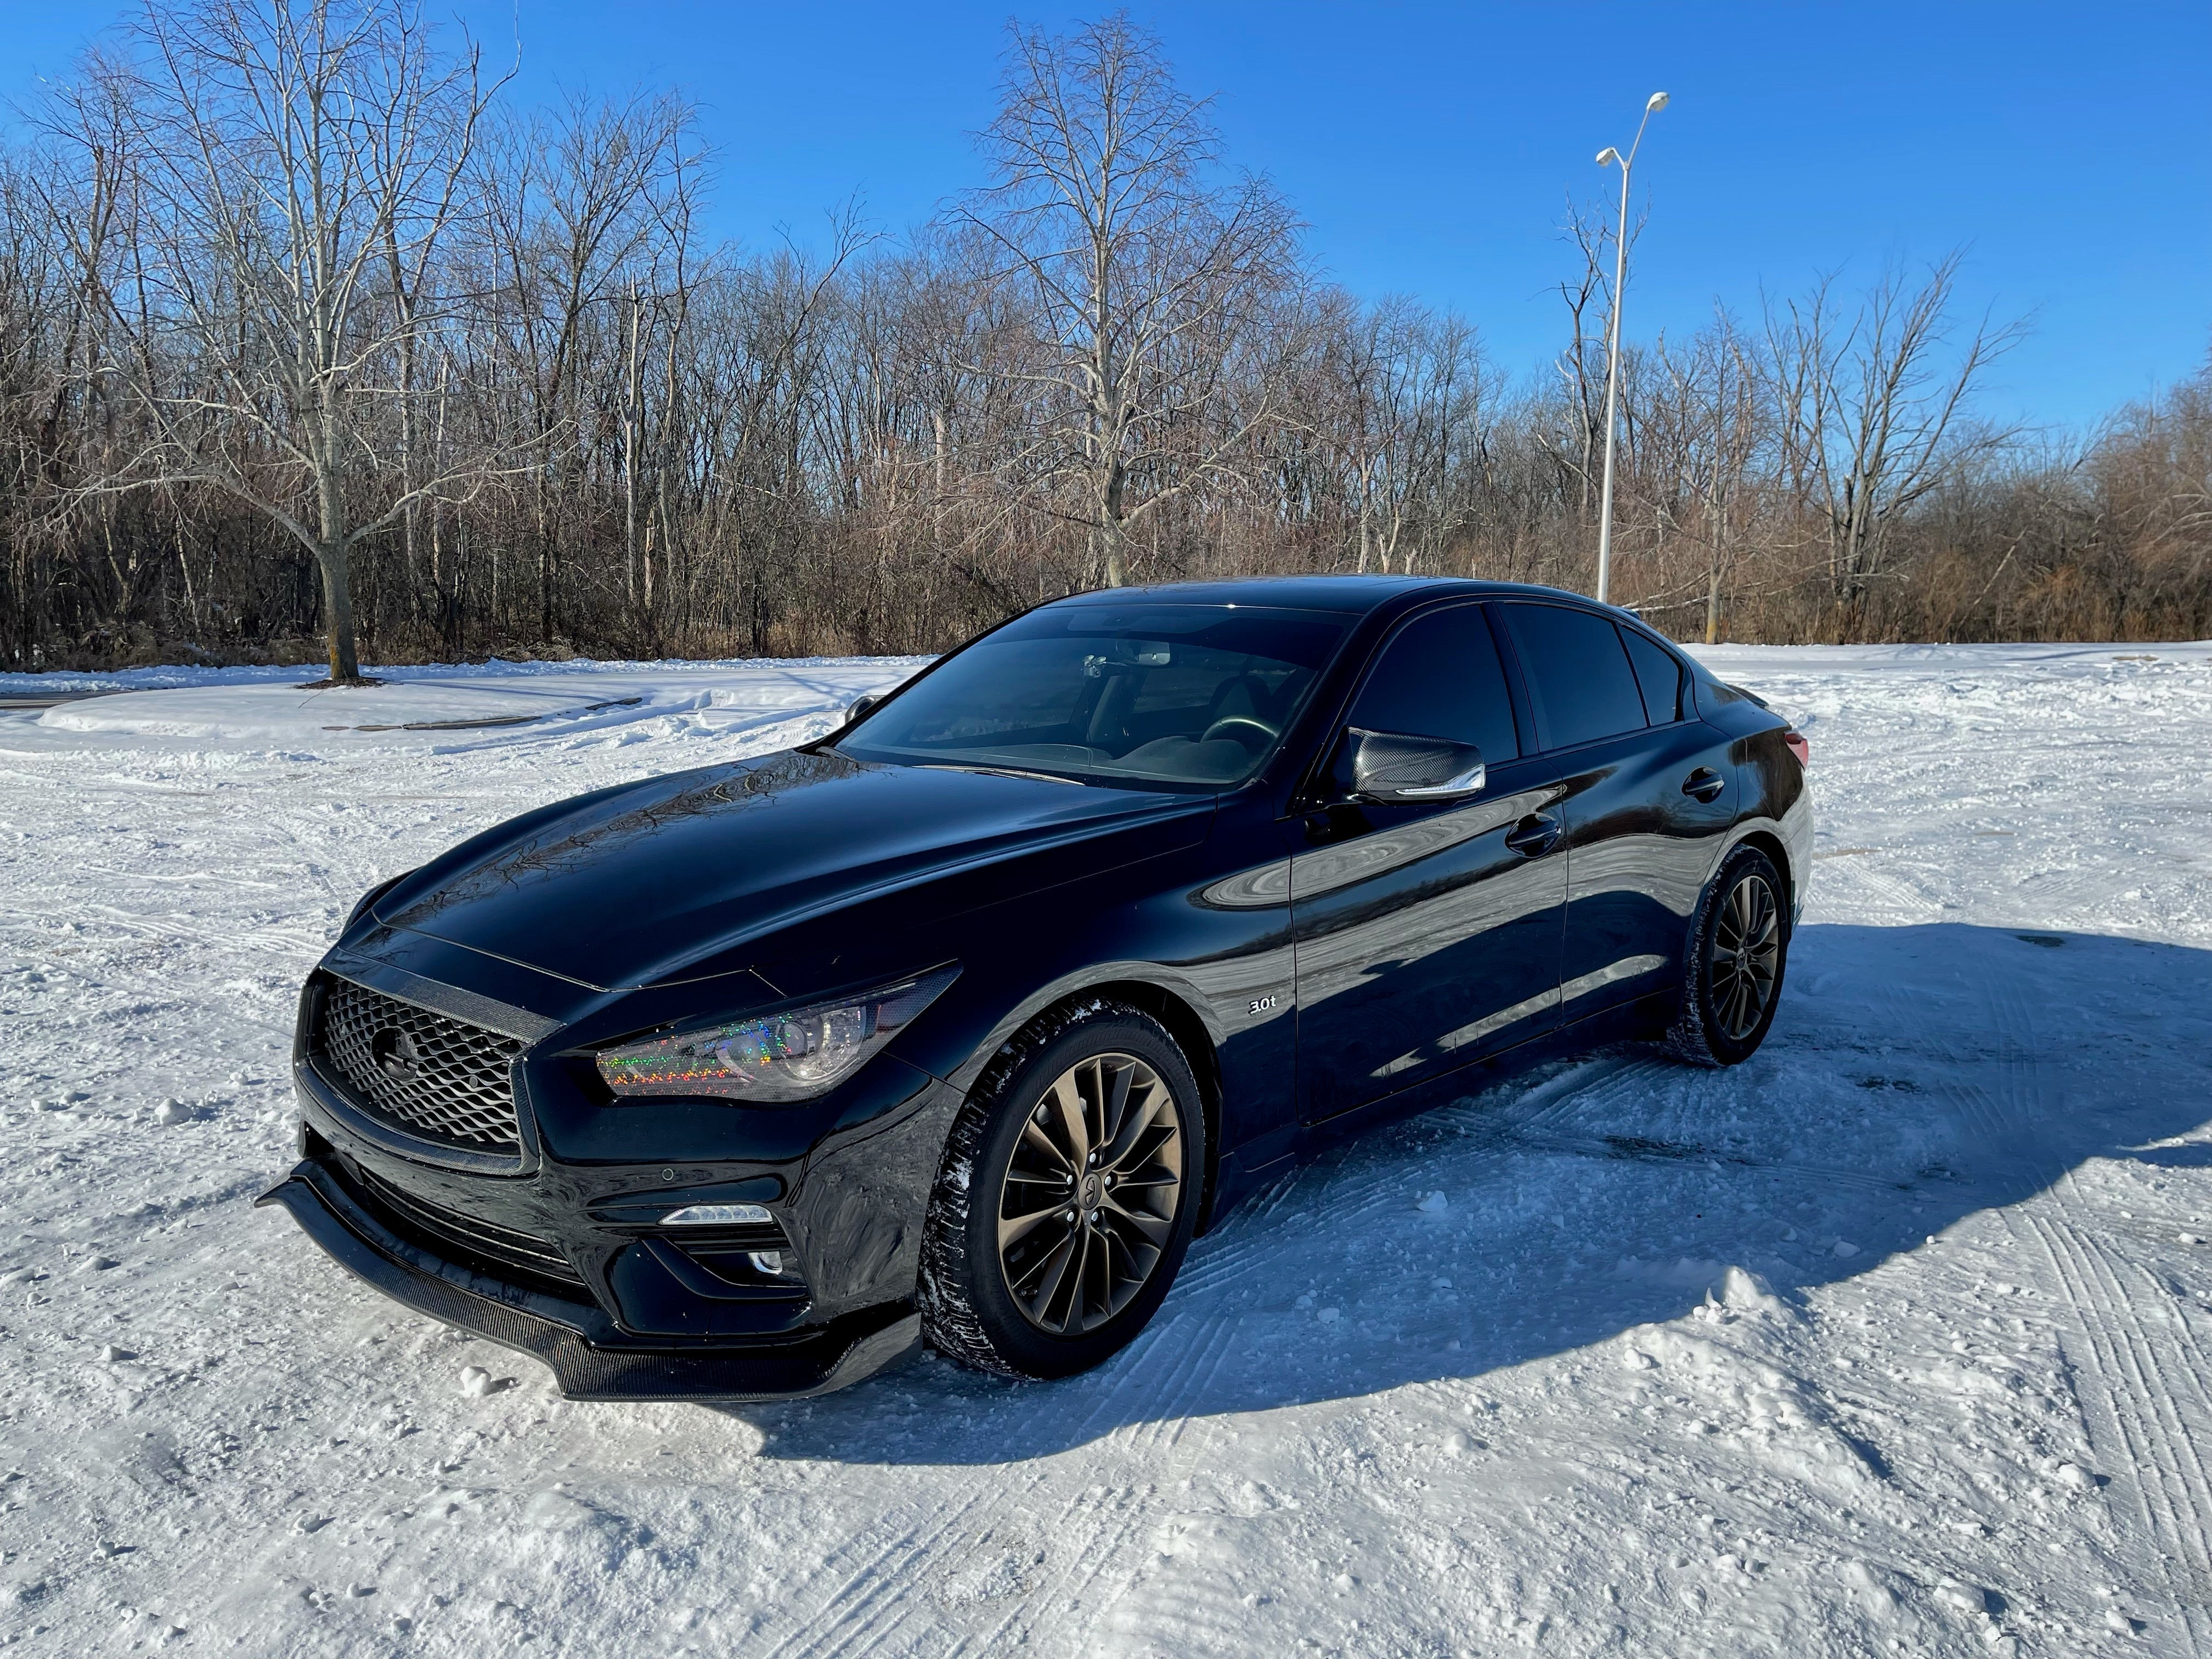 Installation view of JCF Front Lip Splitter on Q50, demonstrating the enhancement of vehicle aesthetics.